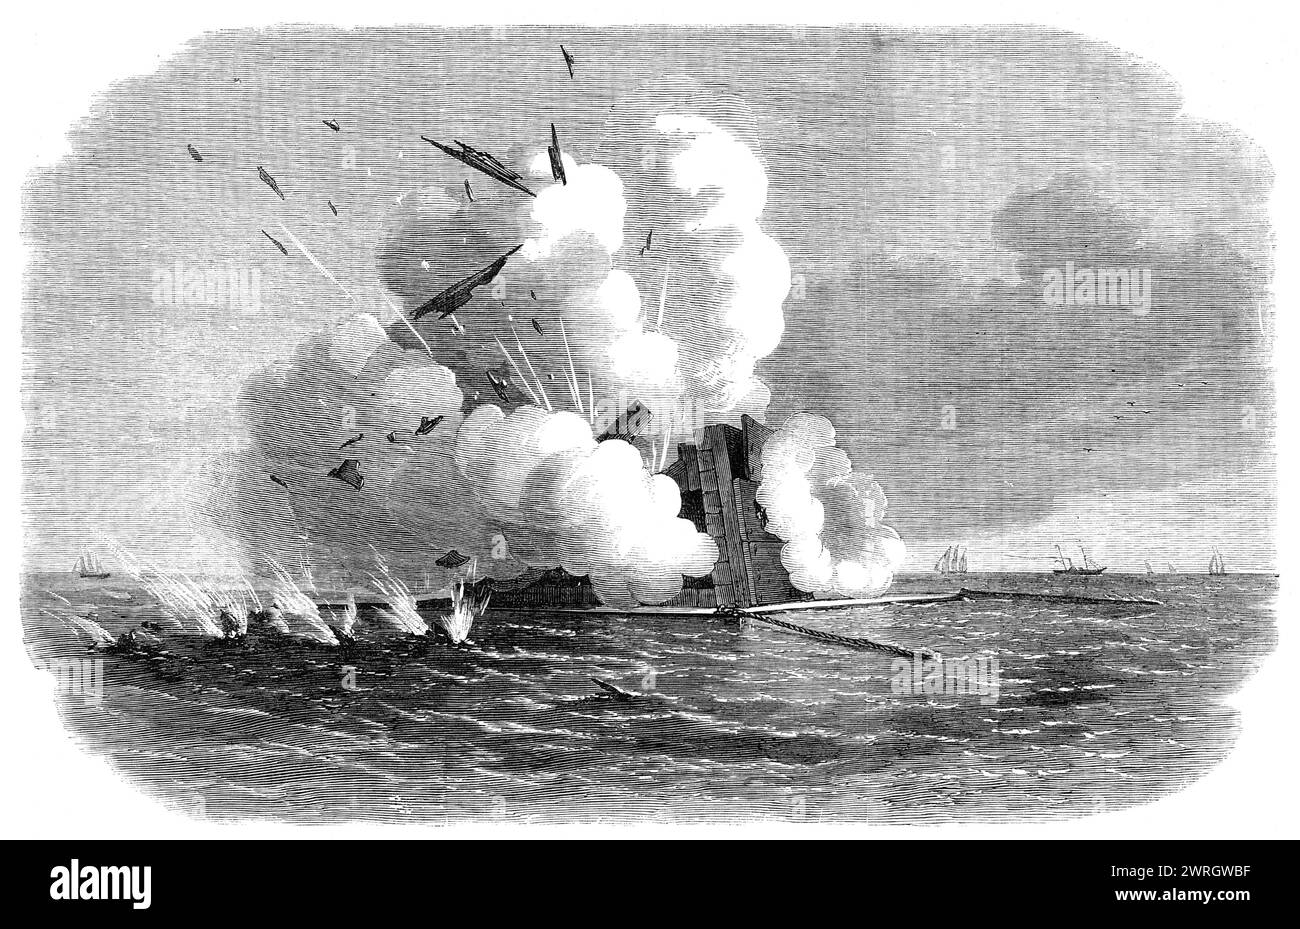 Experiments with the Armstrong 600-pounder against the Warrior floating target, 1864. 'The sight presented by the target when struck was very grand. The shell, from its enormous size, was distinctly seen throughout its flight of 1000 yards from the gun to the target, and as the shell exploded an immense volume of smoke and flame instantly enveloped the target. Above the smoke pieces of plank were seen flying in the air, announcing the demolition of the box in the rear...On taking the target to pieces the shattering effect was found to have extended far beyond the limits of the hole...The whole Stock Photo